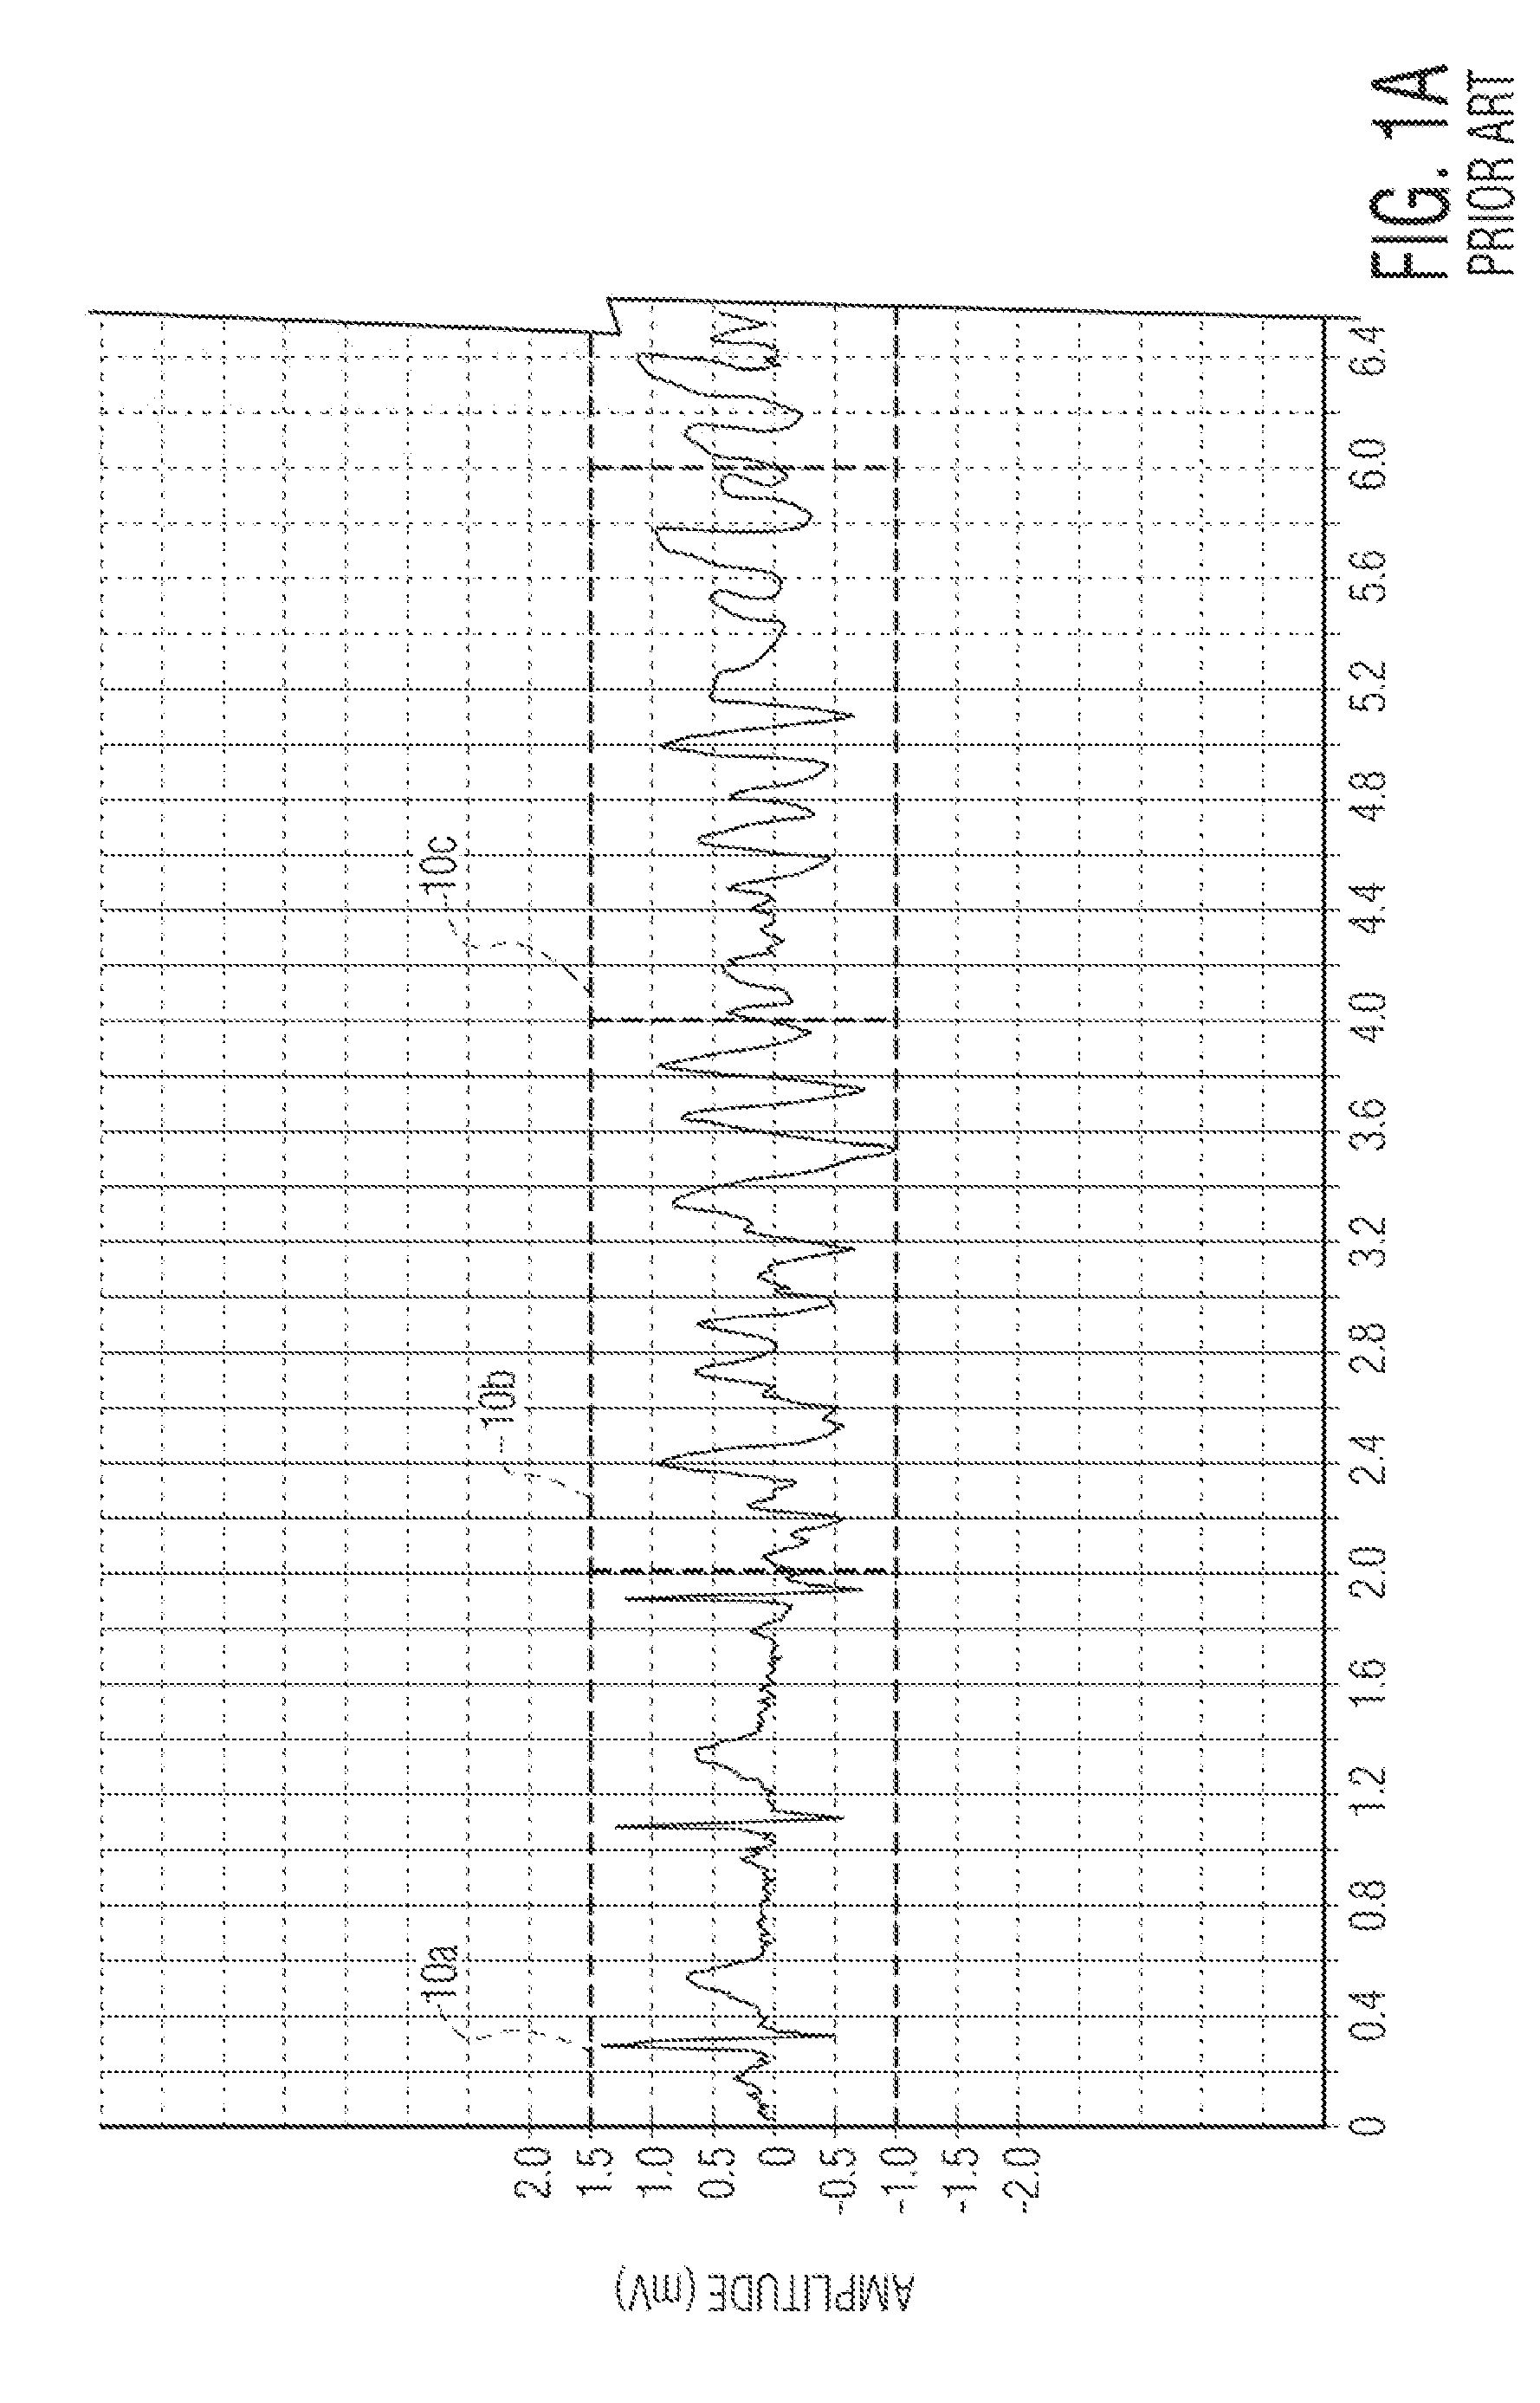 Circuit and method for analyzing a patient's heart function using overlapping analysis windows